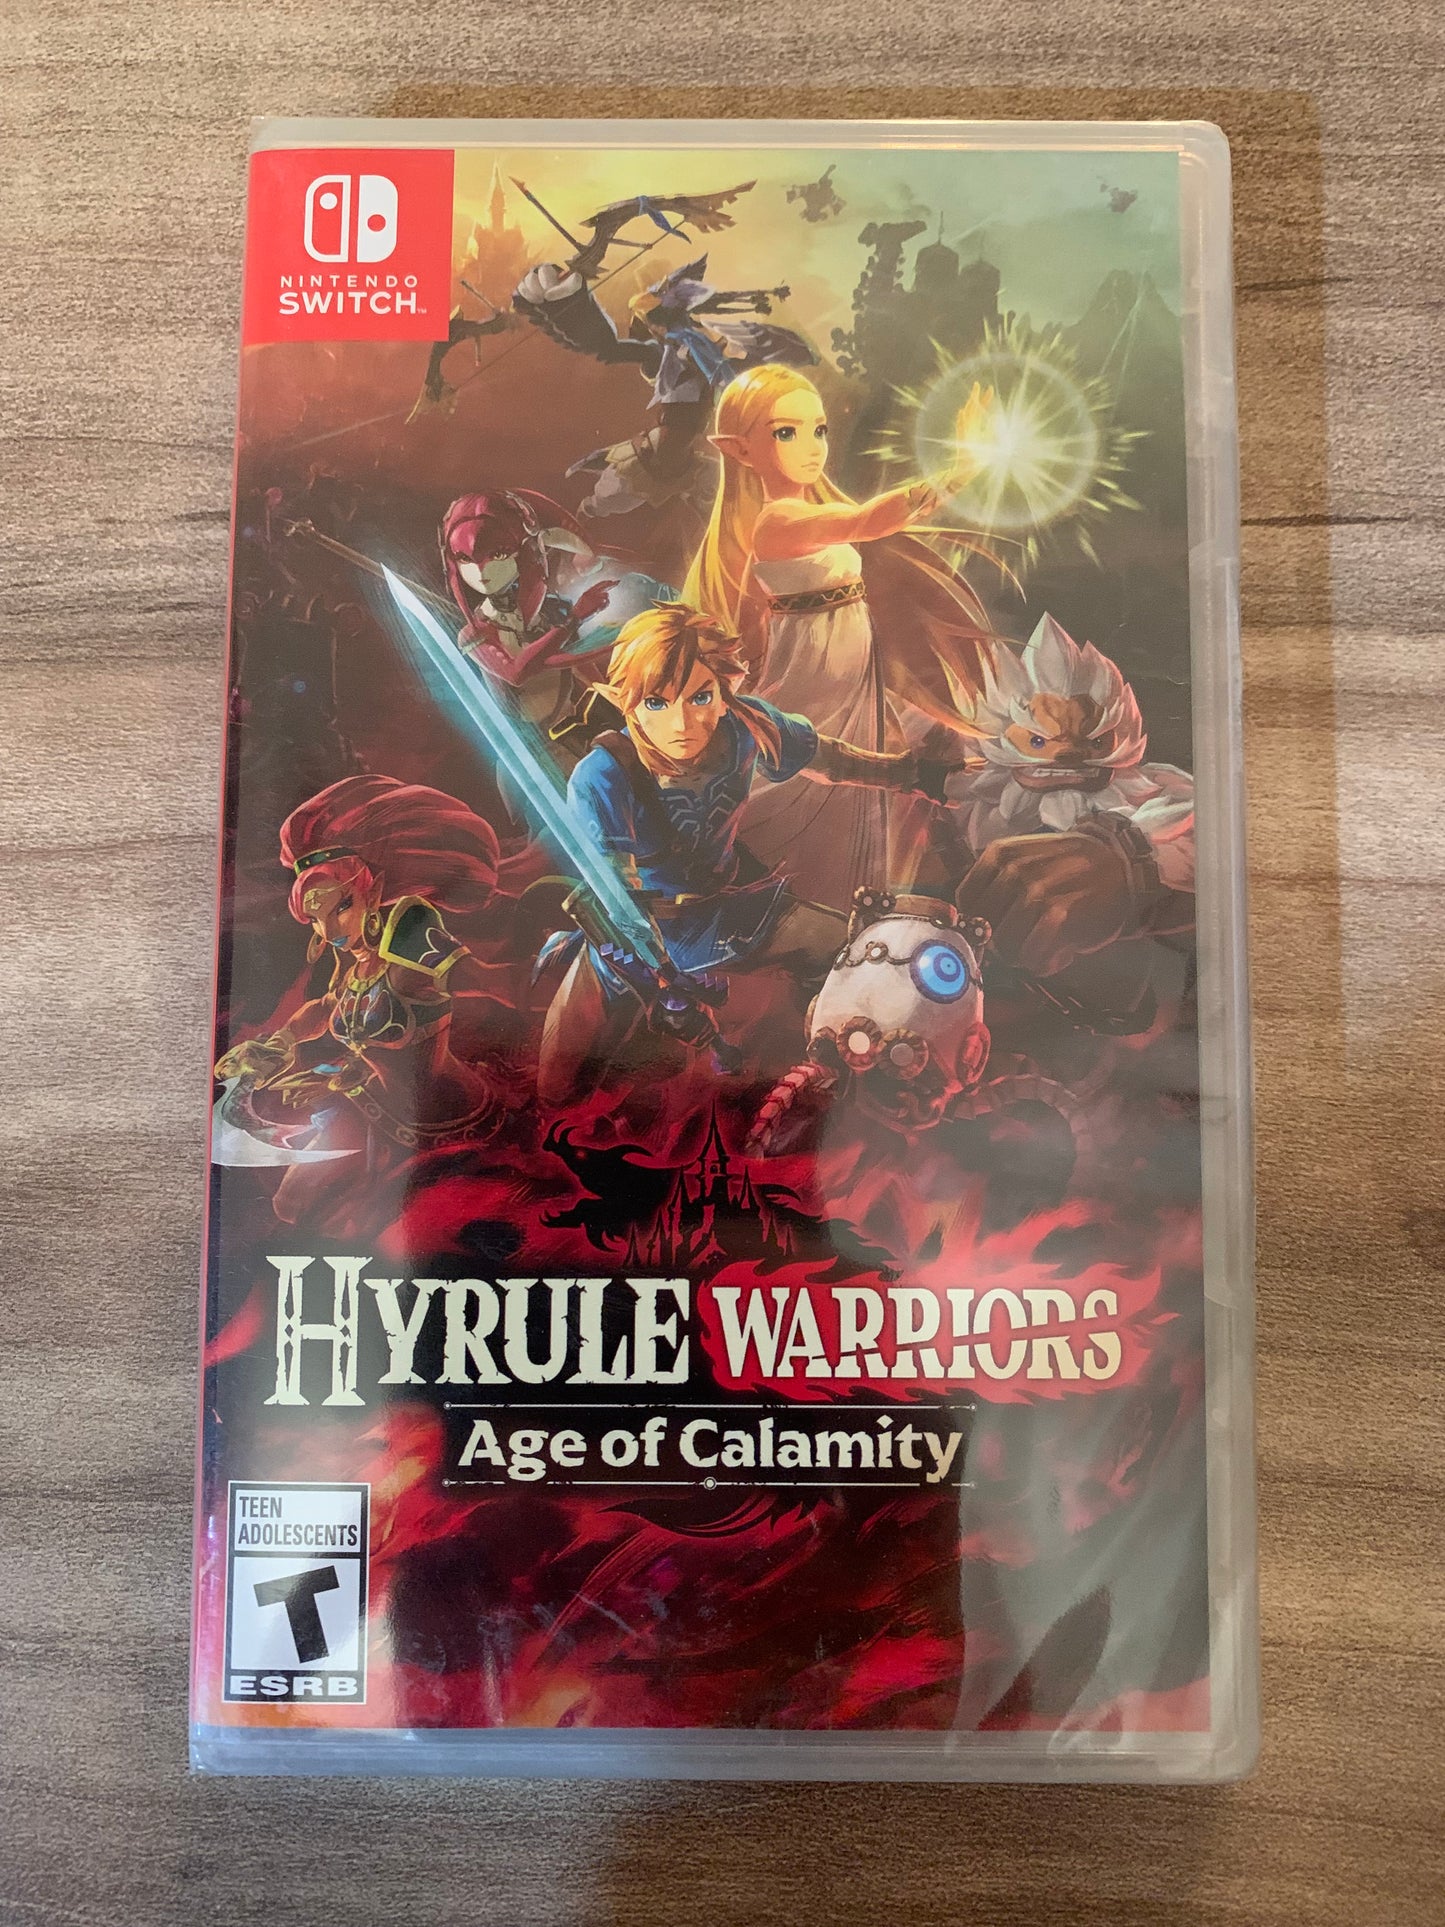 PiXEL-RETRO.COM : NINTENDO SWITCH NEW SEALED IN BOX COMPLETE MANUAL GAME NTSC HYRULE WARRIORS AGE OF CALAMITY